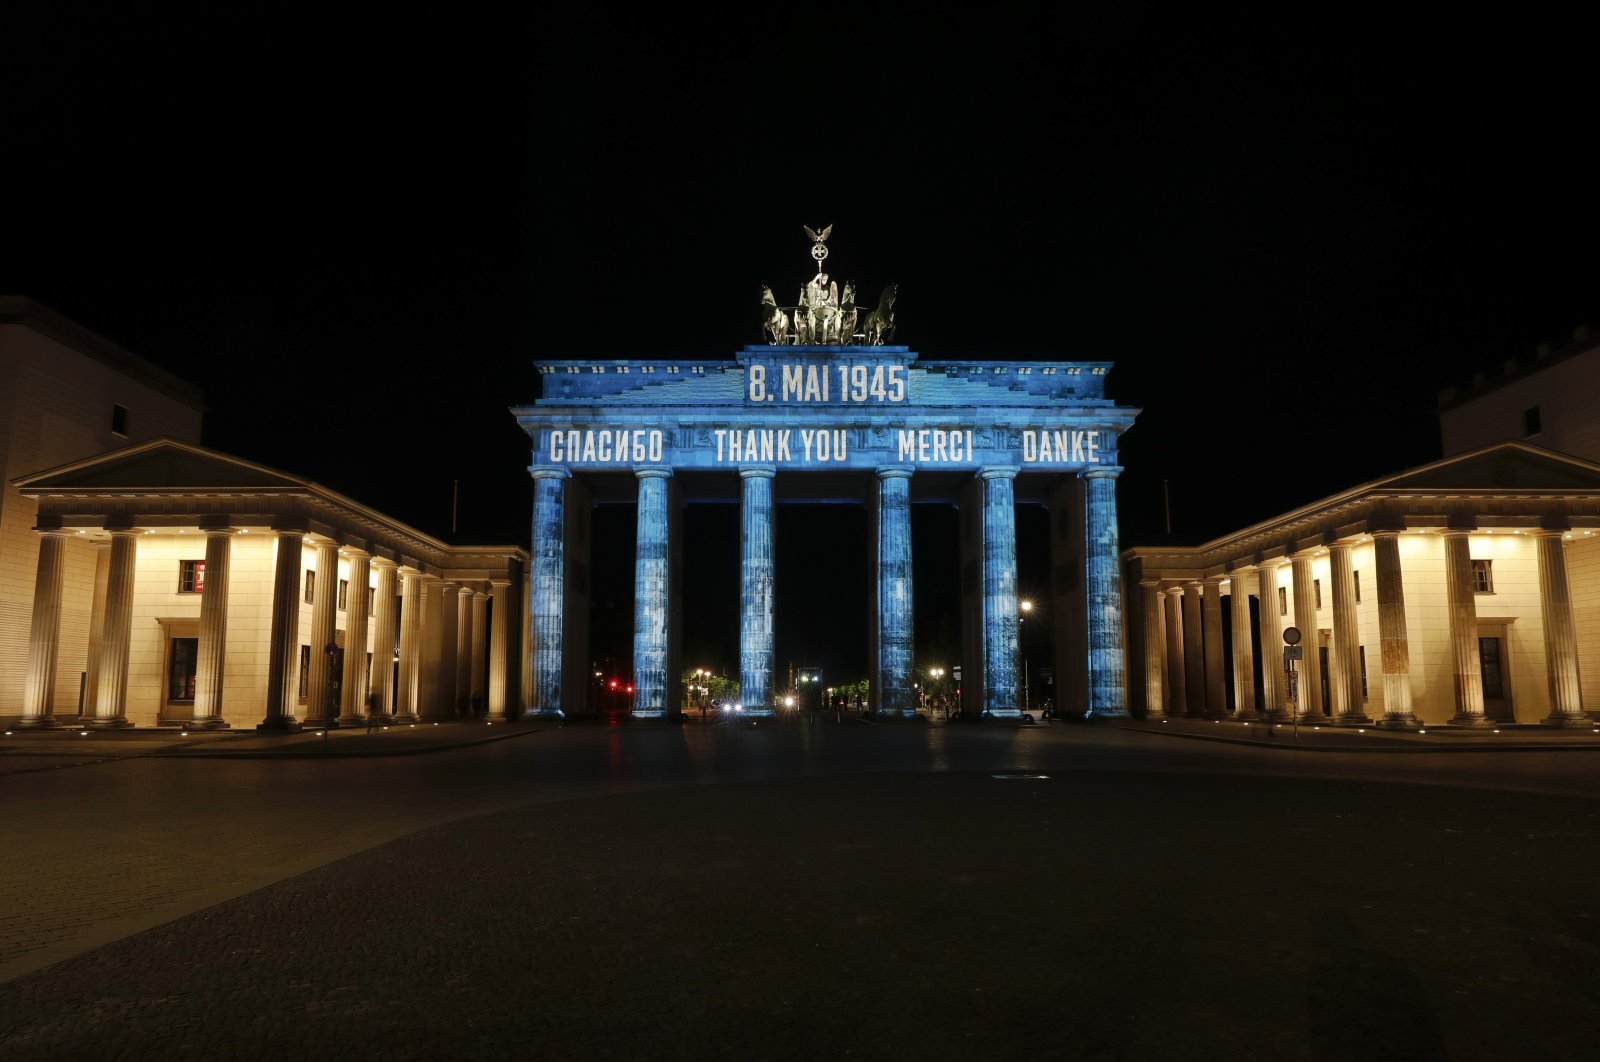 The German landmark Brandenburg Gate is illuminated to mark the 75th anniversary of Victory Day and the end of World War II in Europe, Berlin, Germany, May 8, 2020. (AP Photo)